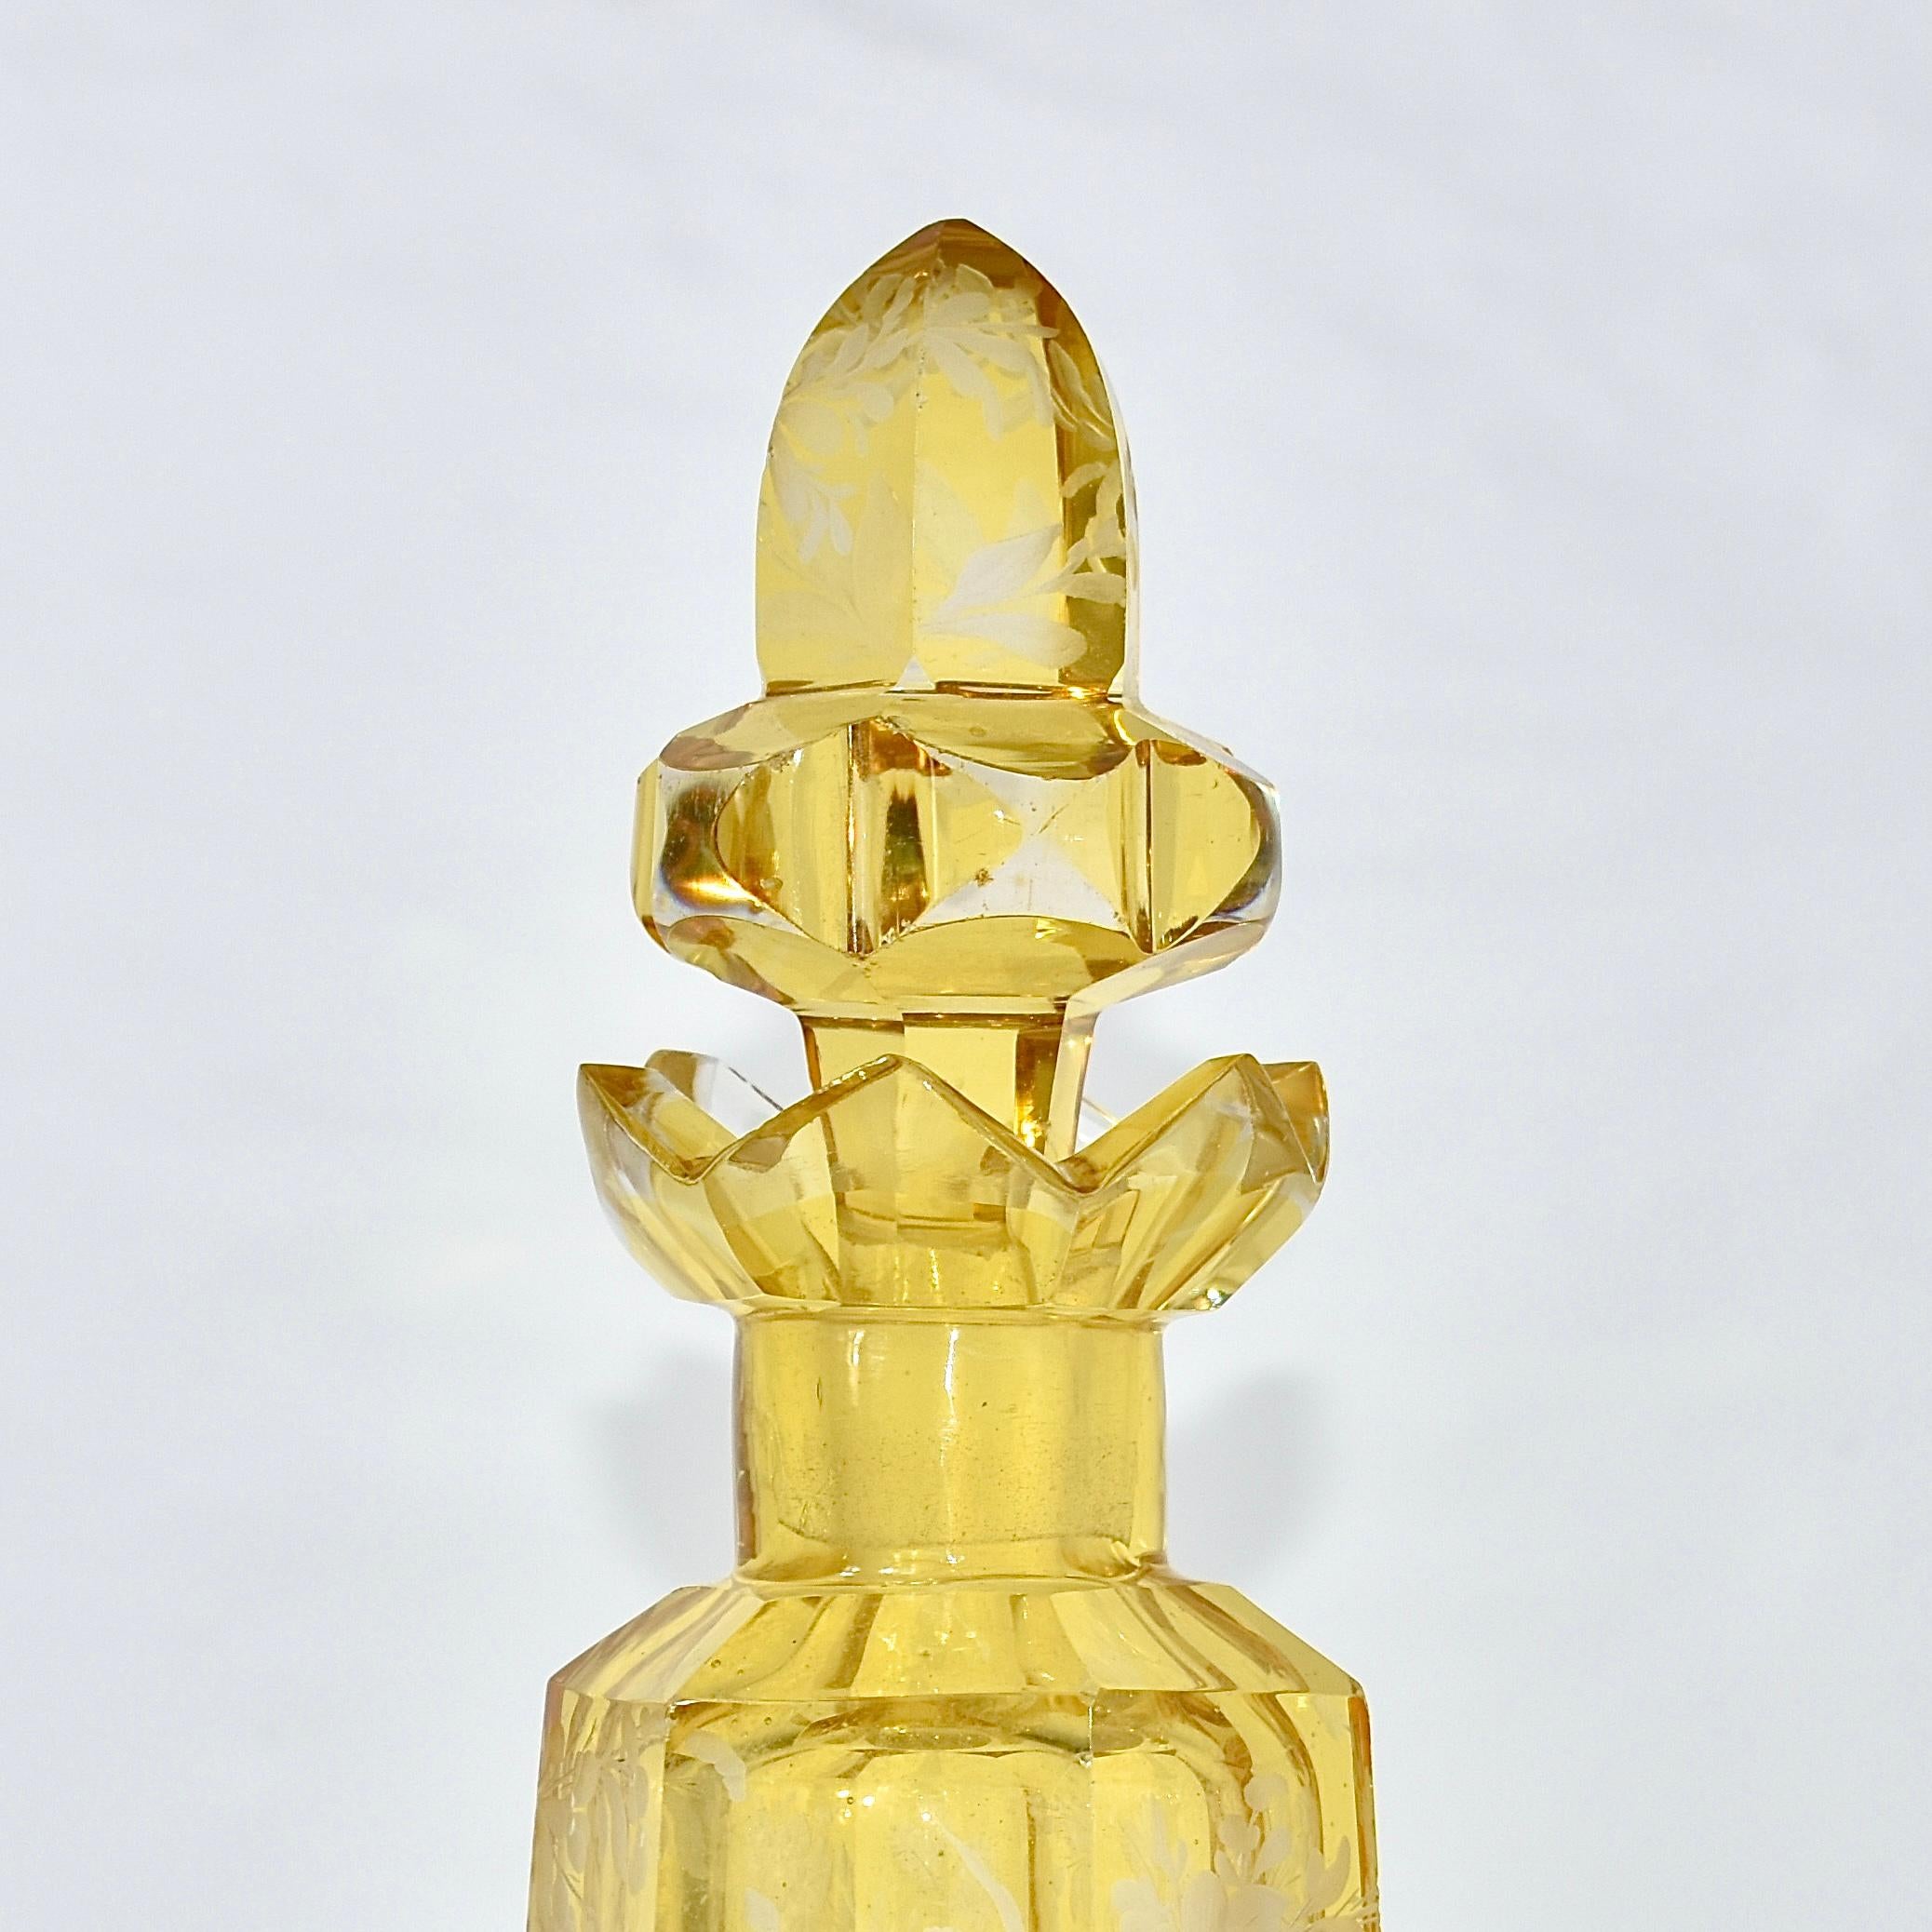 Antique Bohemian Amber Engraved Glass Perfume Bottle, Flacon, 19th Century In Good Condition For Sale In Rostock, MV